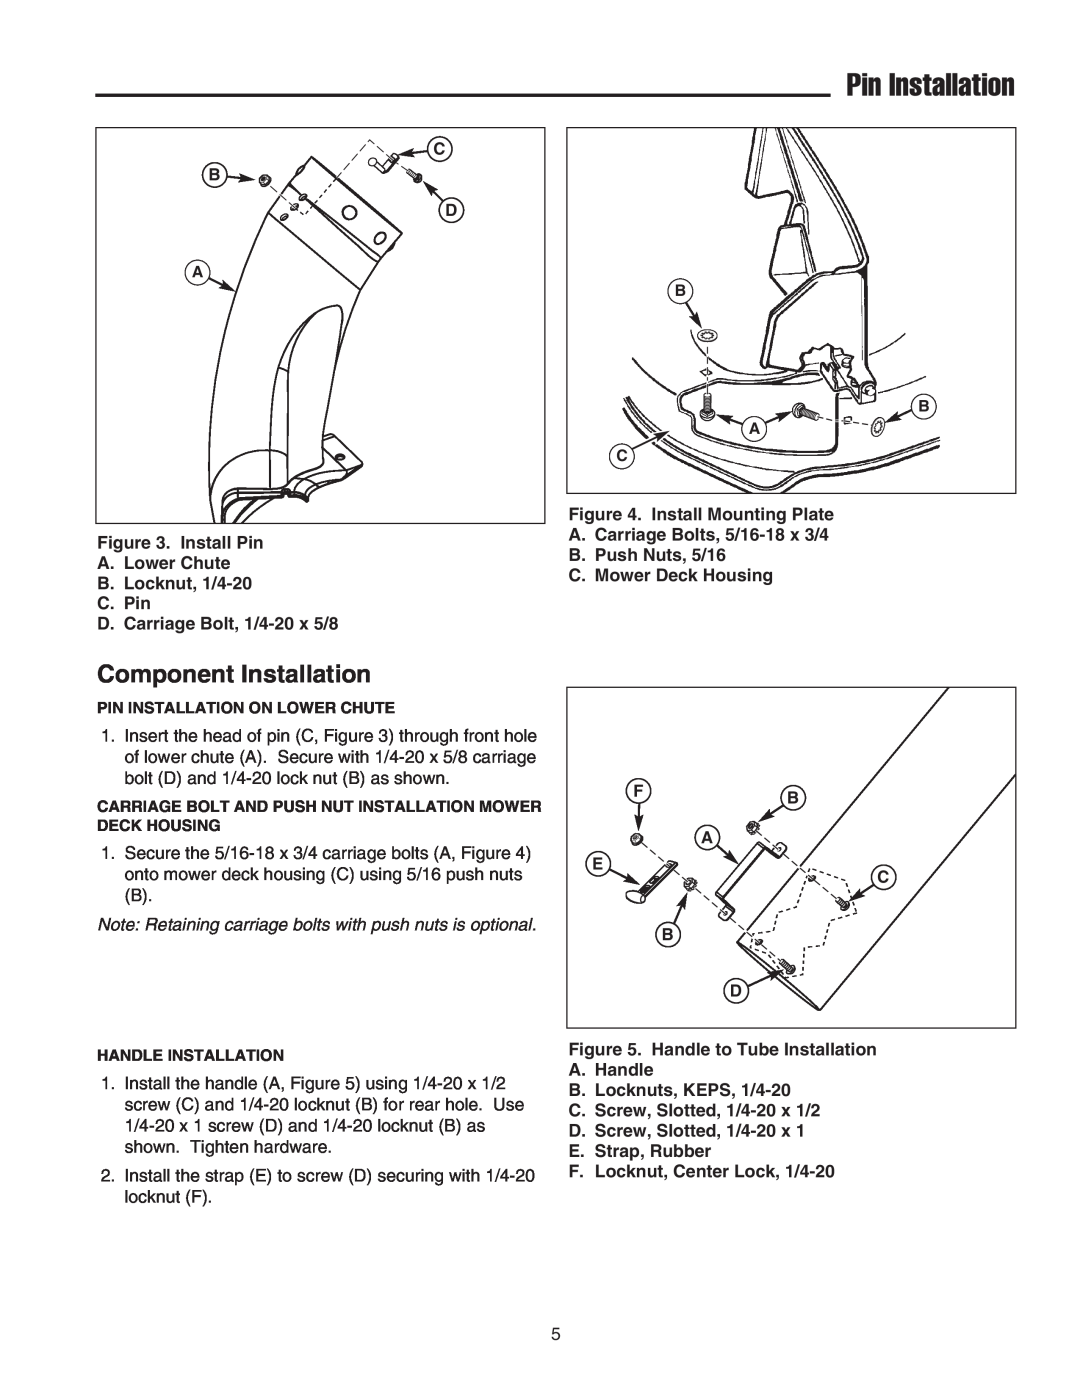 Snapper 1695164 manual Pin Installation, Component Installation, Note Retaining carriage bolts with push nuts is optional 